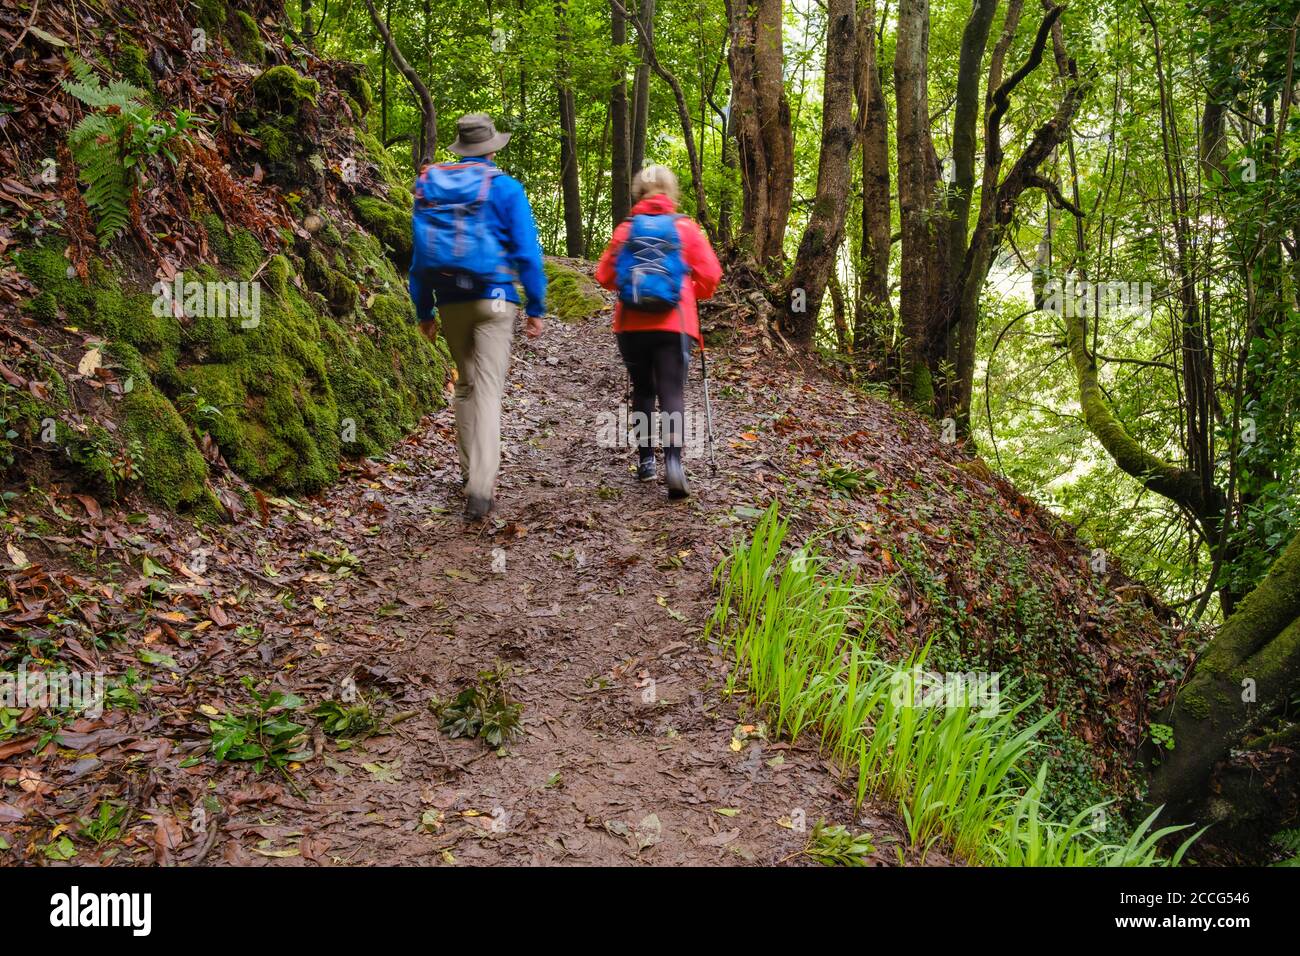 Couple hikes on forest path in cloud forest at El Cedro, Garajonay National Park, La Gomera, Canary Islands, Spain Stock Photo